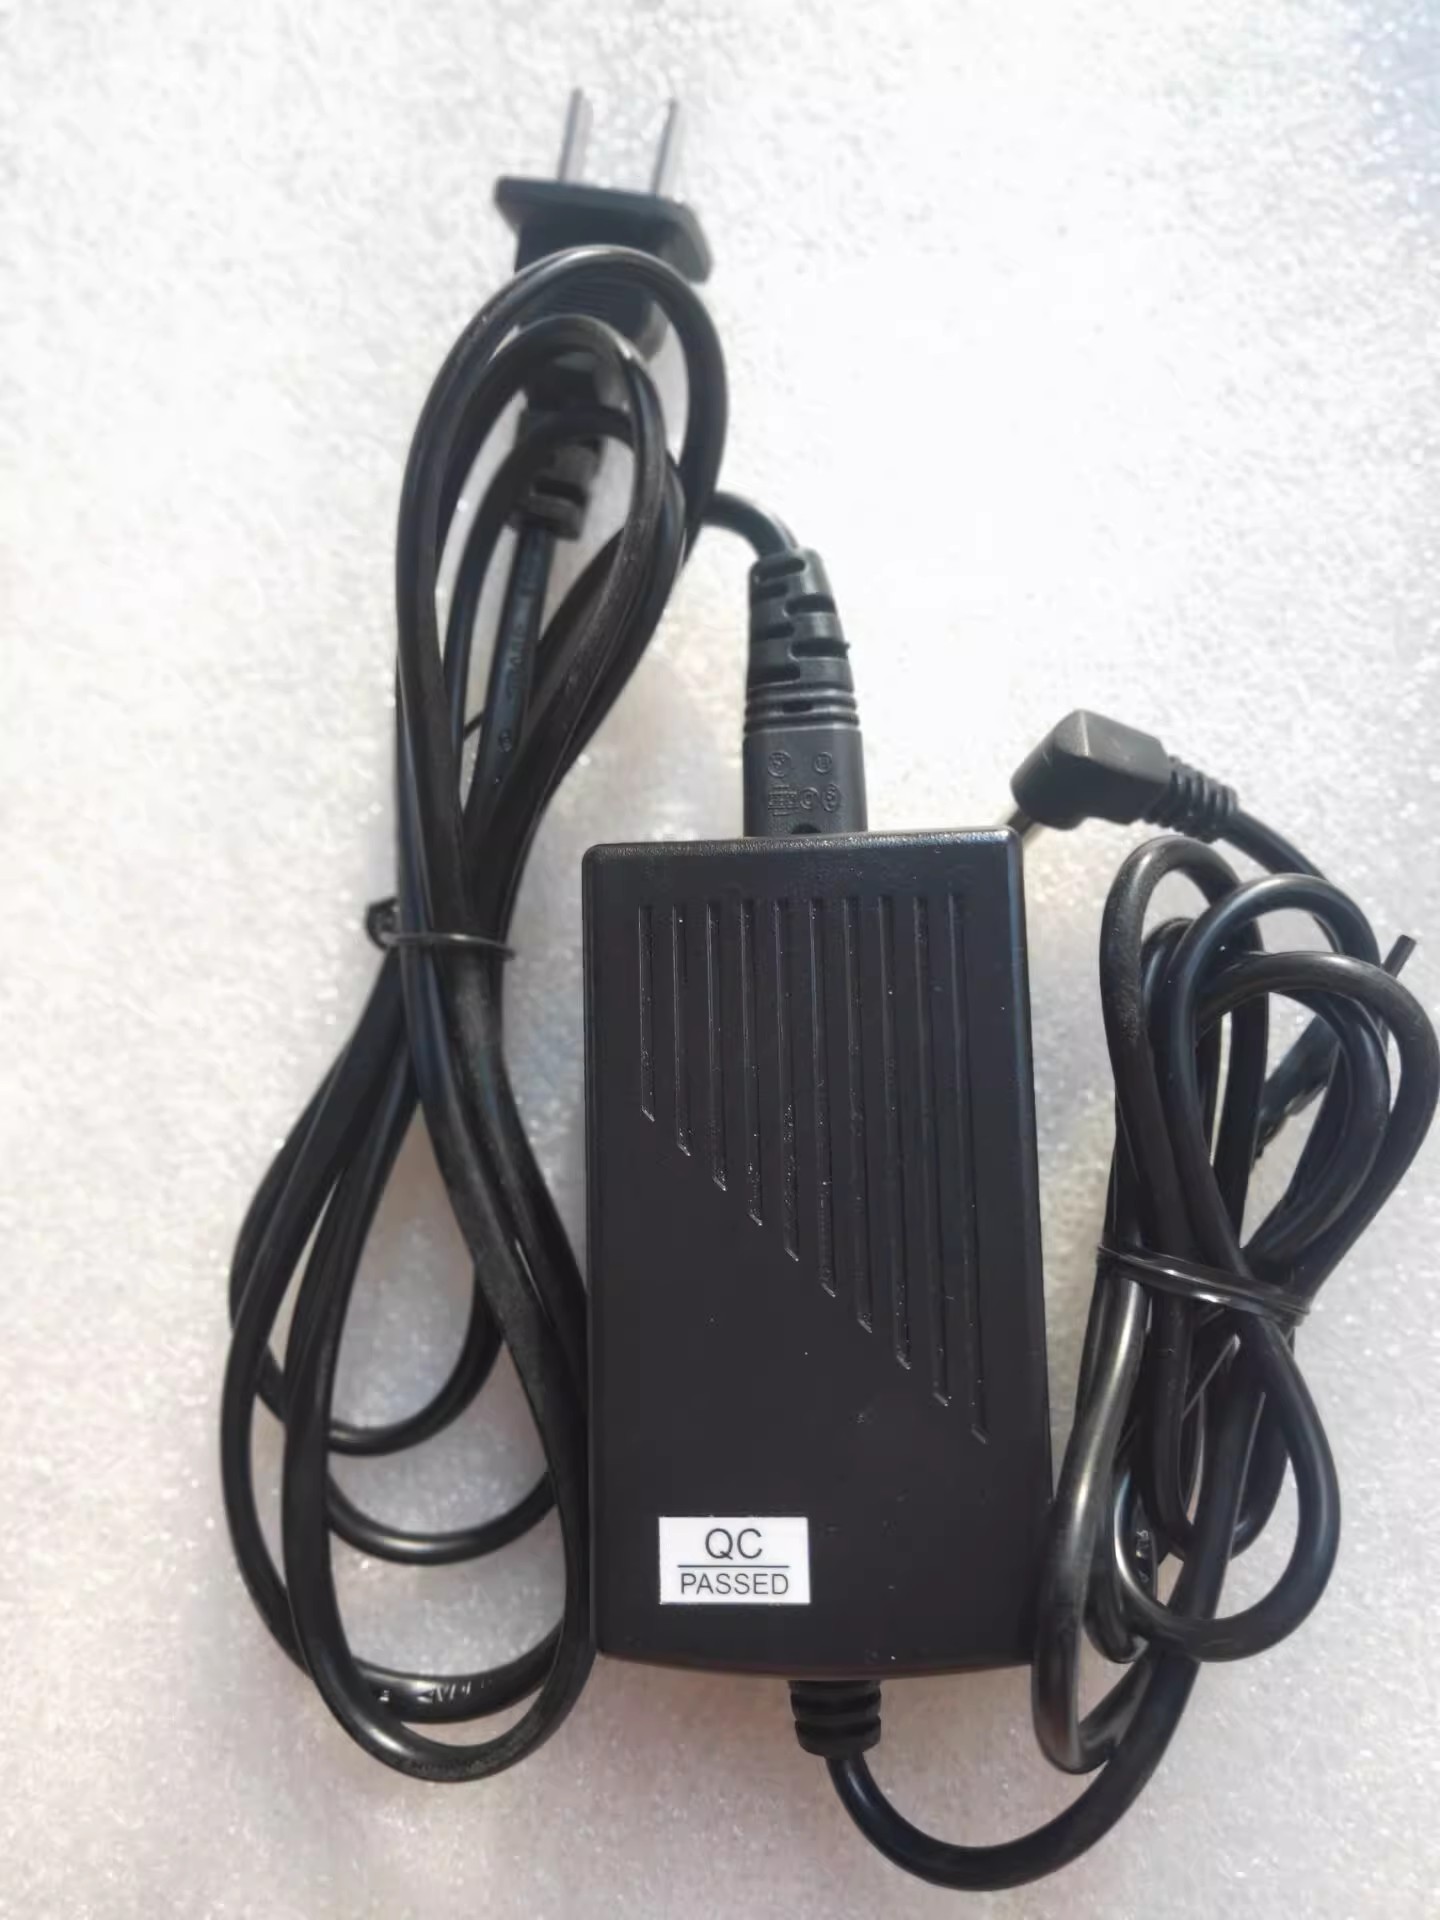 *Brand NEW* 92000 NUX DM2 3 4 5 ACD-008A-CN 9V 1-2A AC DC ADAPTHE POWER Supply